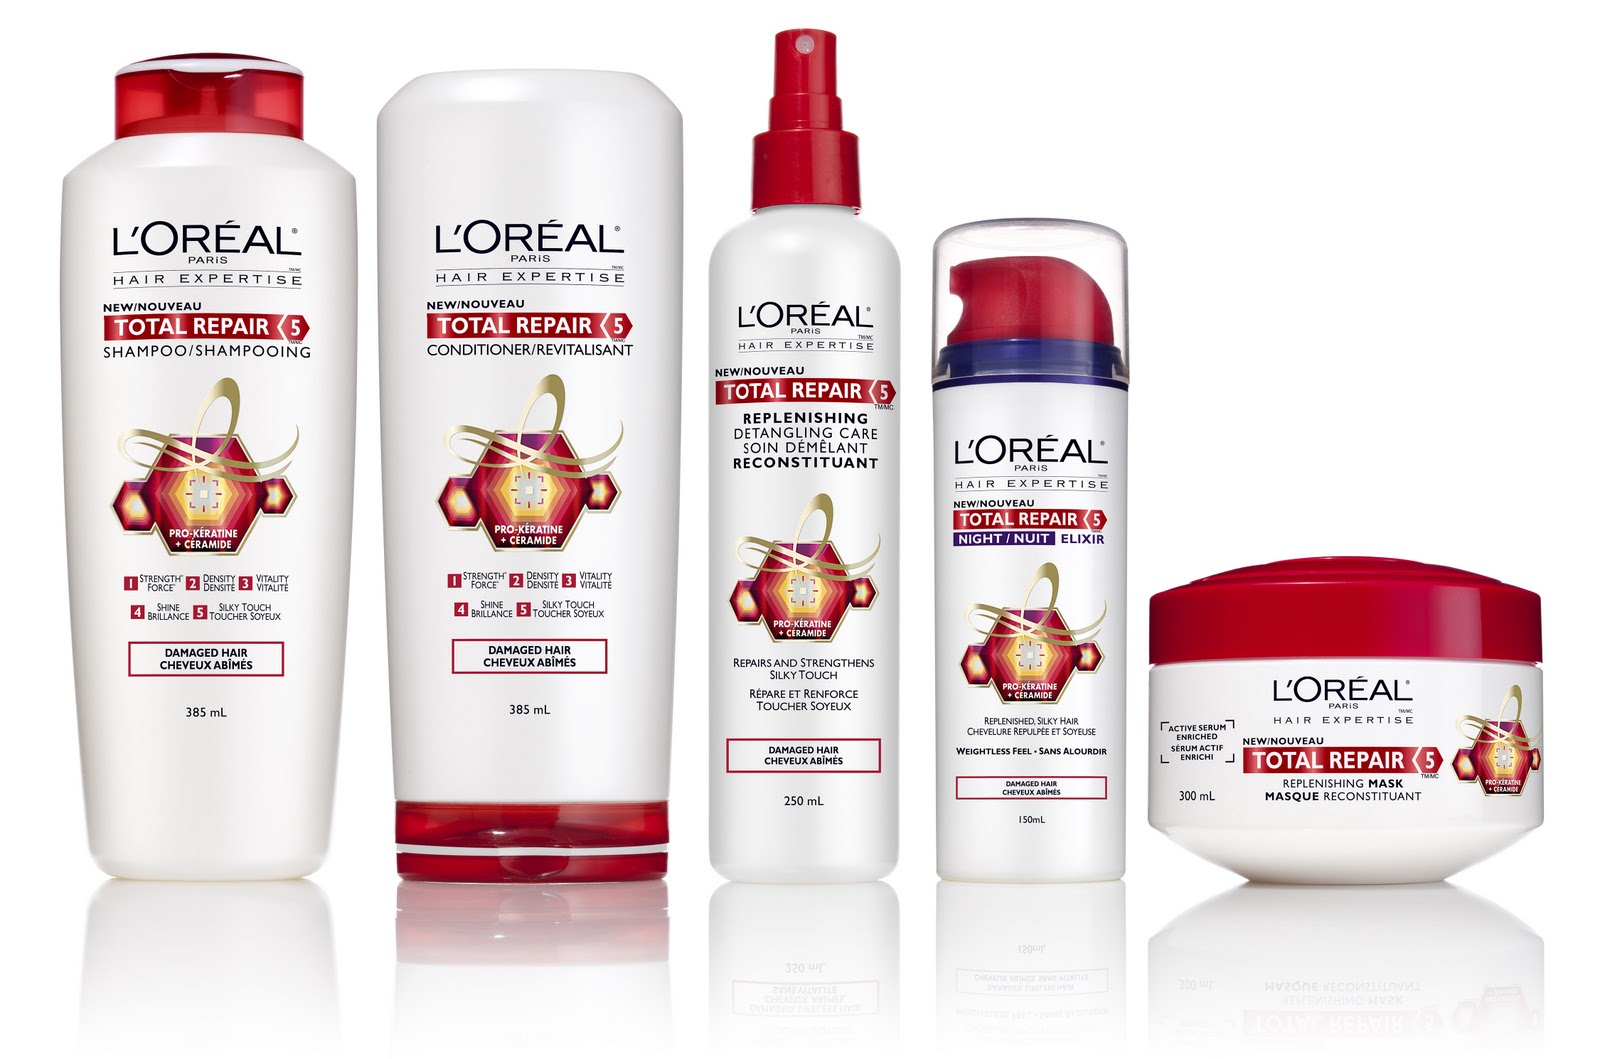 2. L'Oreal Paris Hair Care EverPure Blonde Sulfate Free Shampoo & Conditioner Kit for Color-Treated Hair, Neutralizes Brass + Balances, For Blonde Hair, Combo (8.5 Fl. Oz each) - wide 1